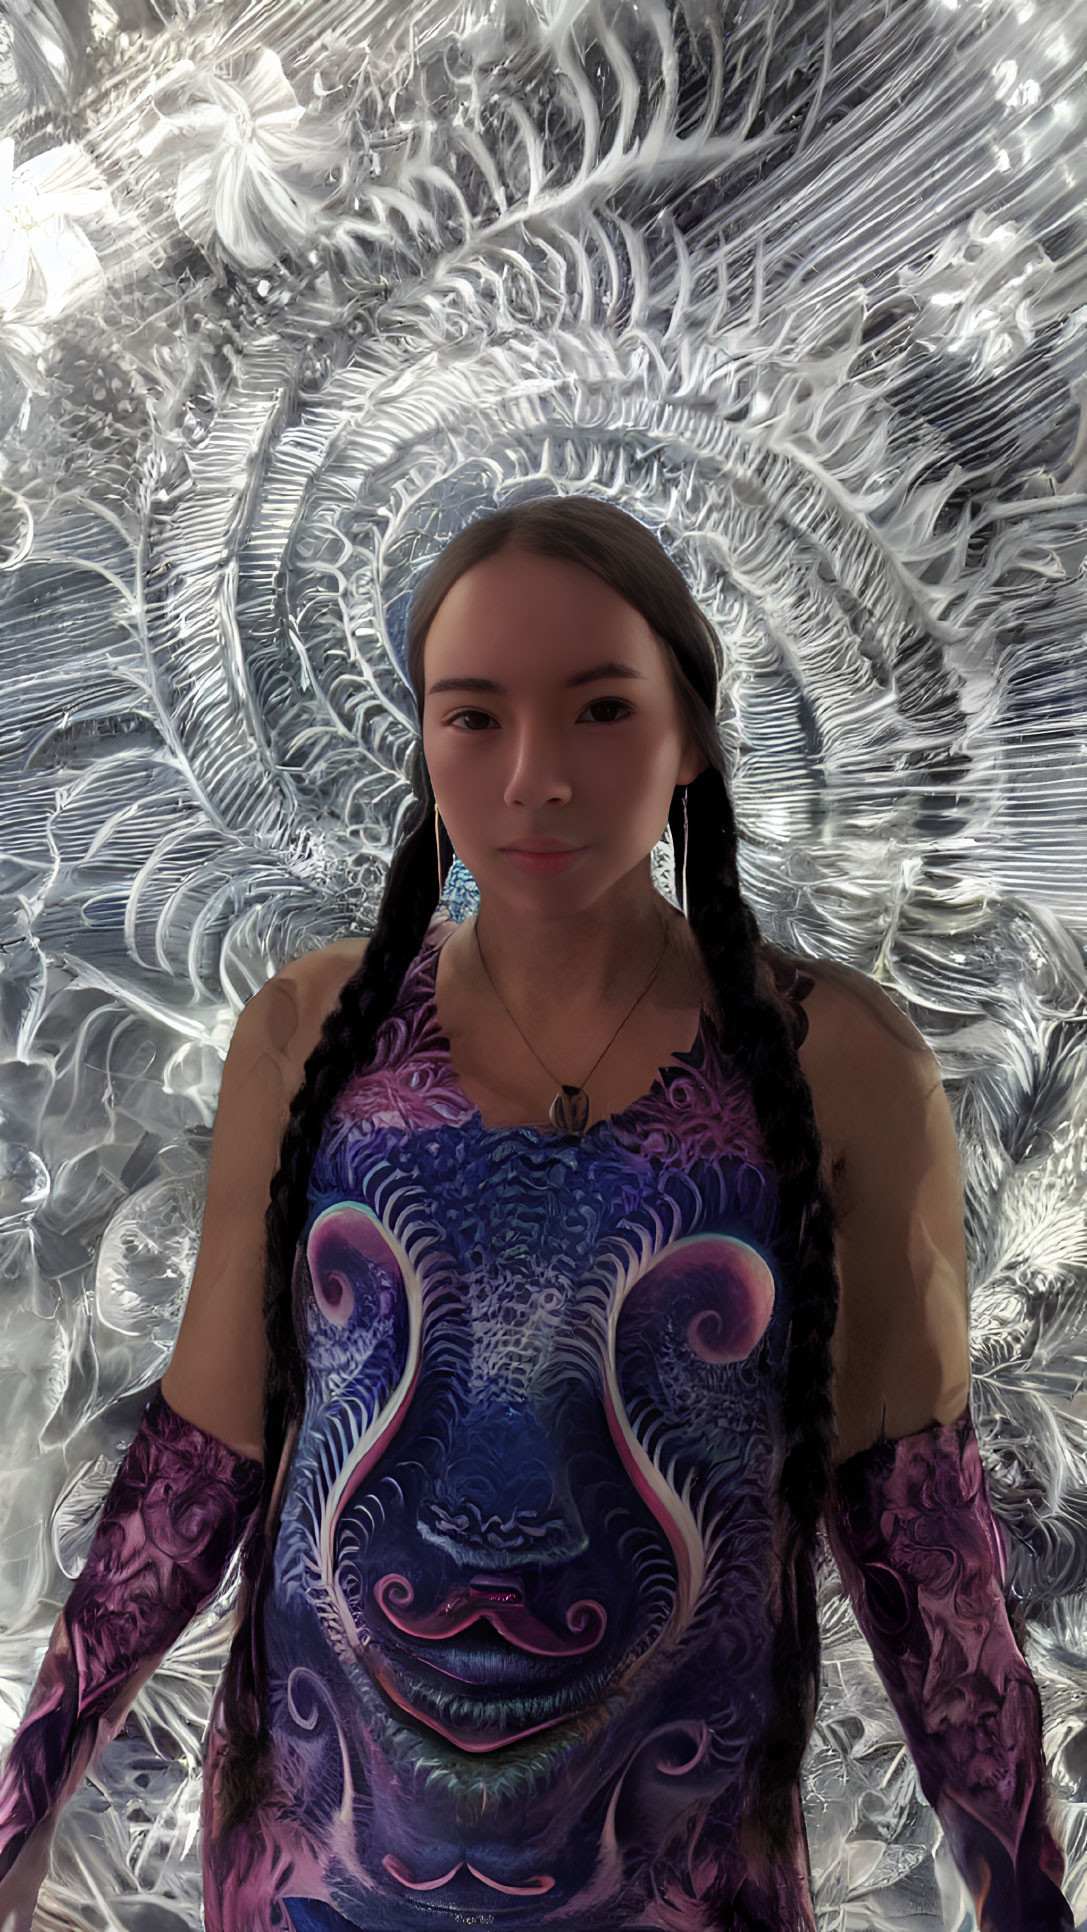 Braided hair woman in blue and purple patterned top against swirling backdrop